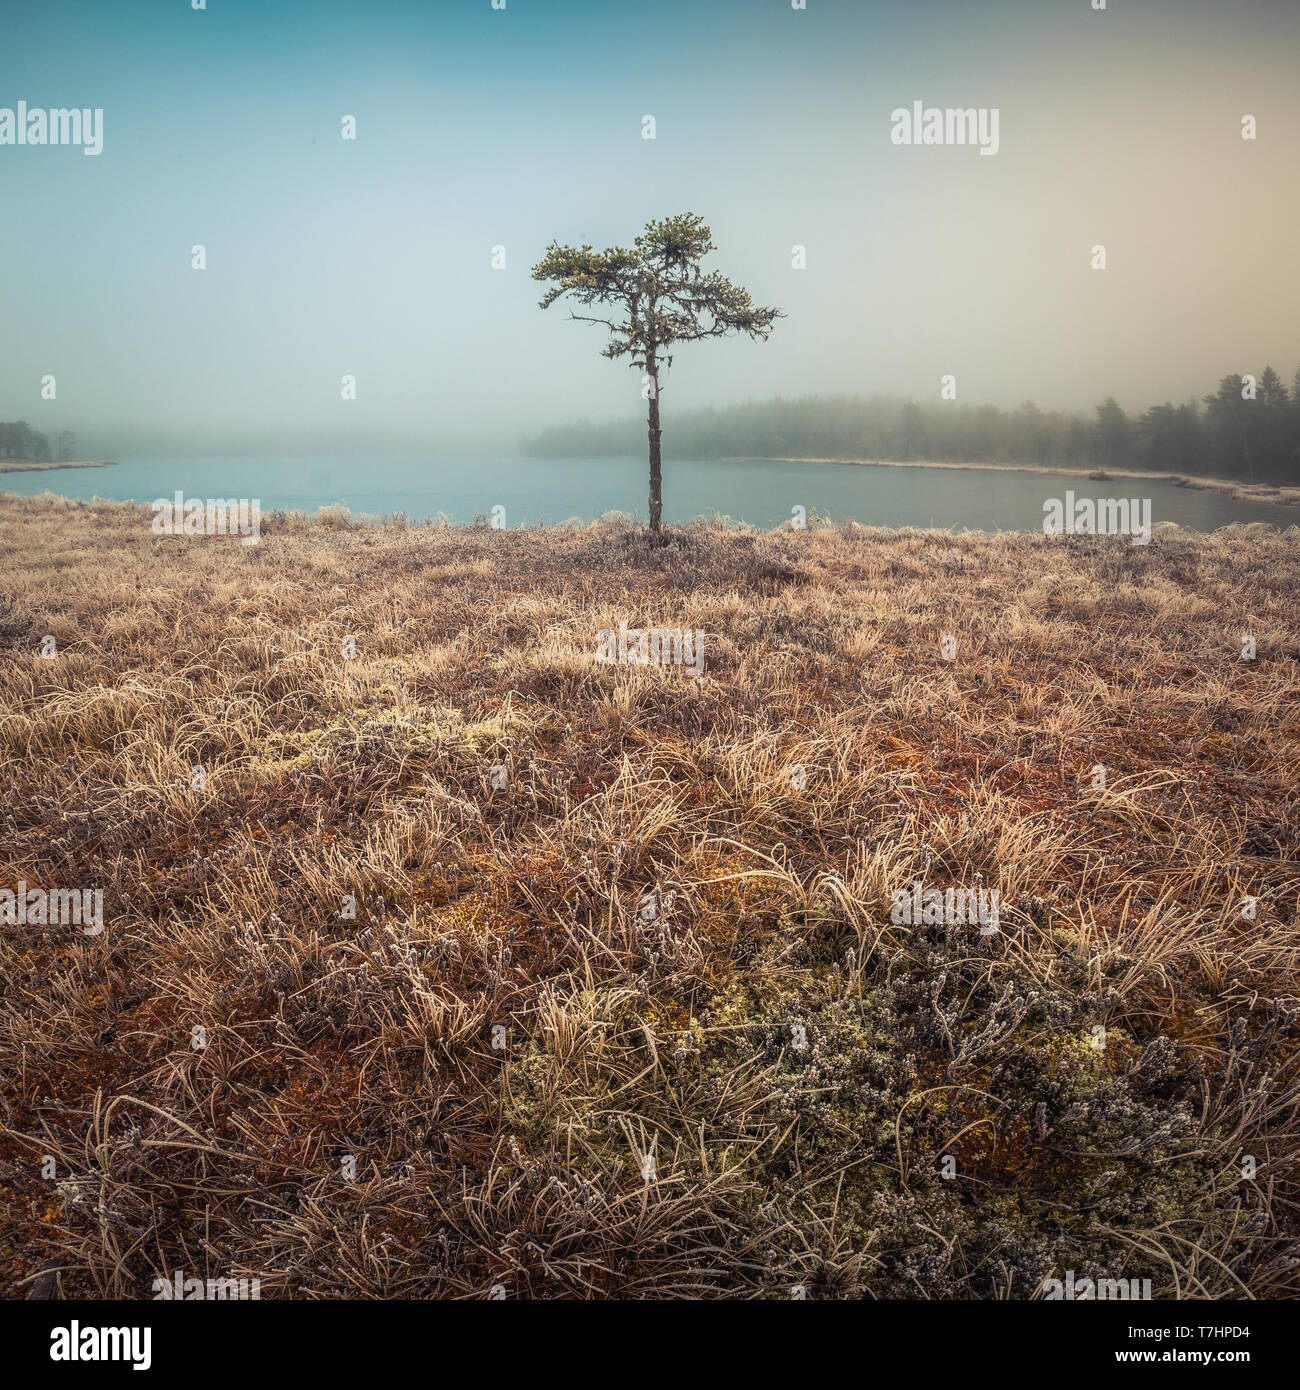 Morning hoar frost and ice on the grass and trees in Jonsvatnet area, Norway. Boreal swampy forest ground near Malvik. Stock Photo